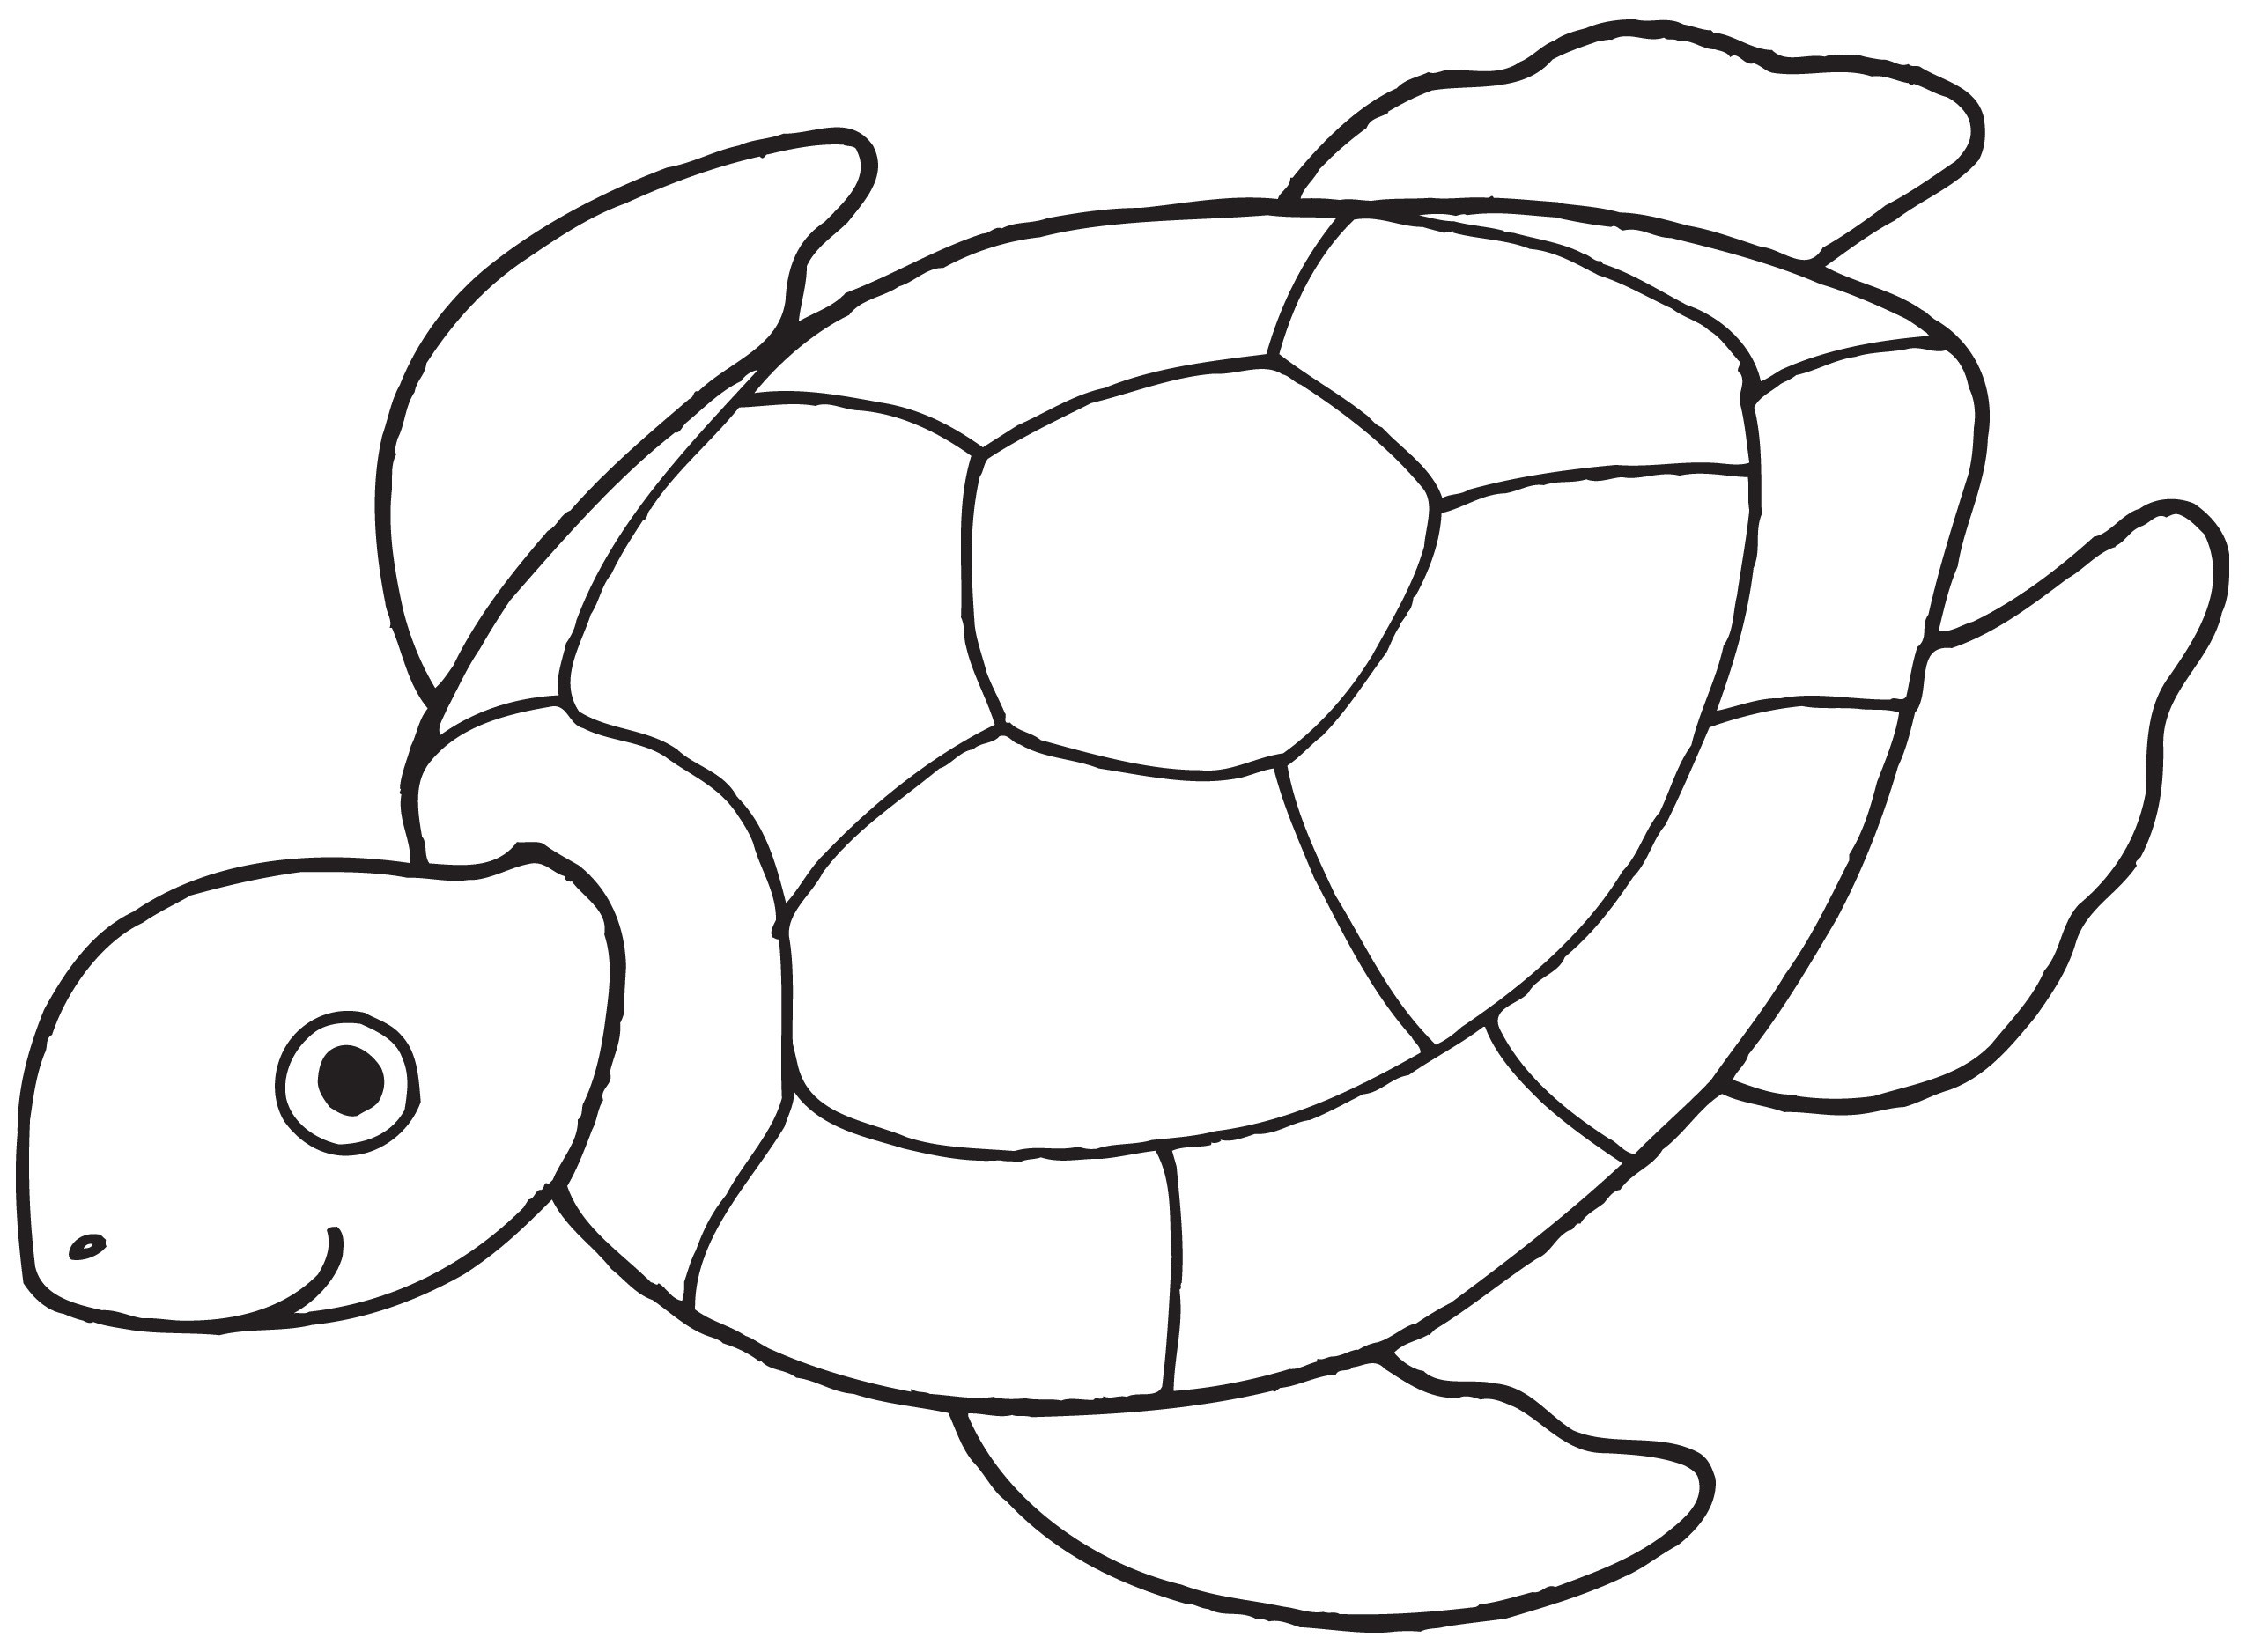 Turtle Clip Art | Clipart library - Free Clipart Images